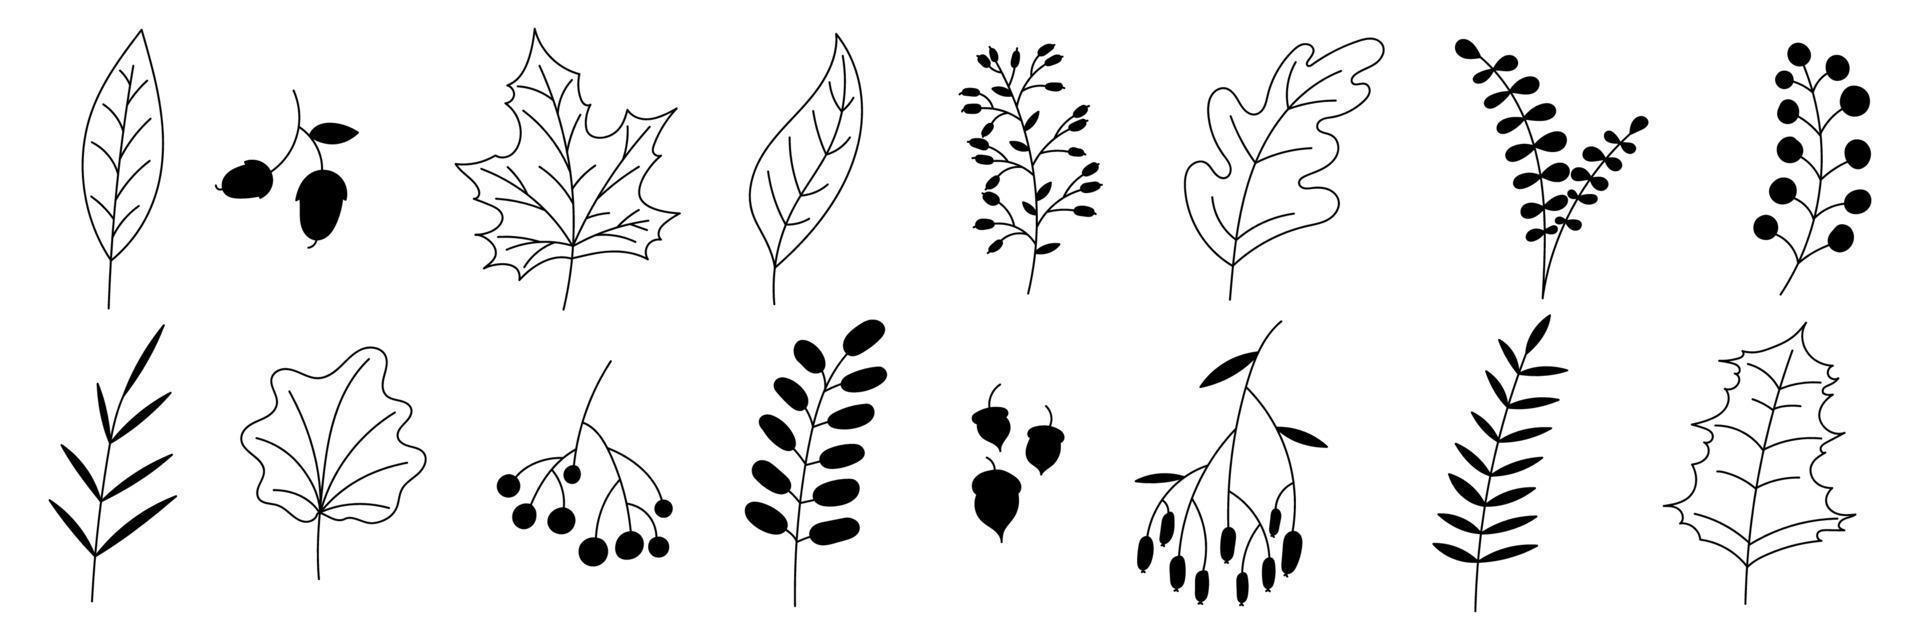 Hand drawn autumn collection with seasonal plants and leaves. Set of hand drawn plants, leaves, flowers. Silhouettes of natural elements for seasonal backgrounds. Vector illustration